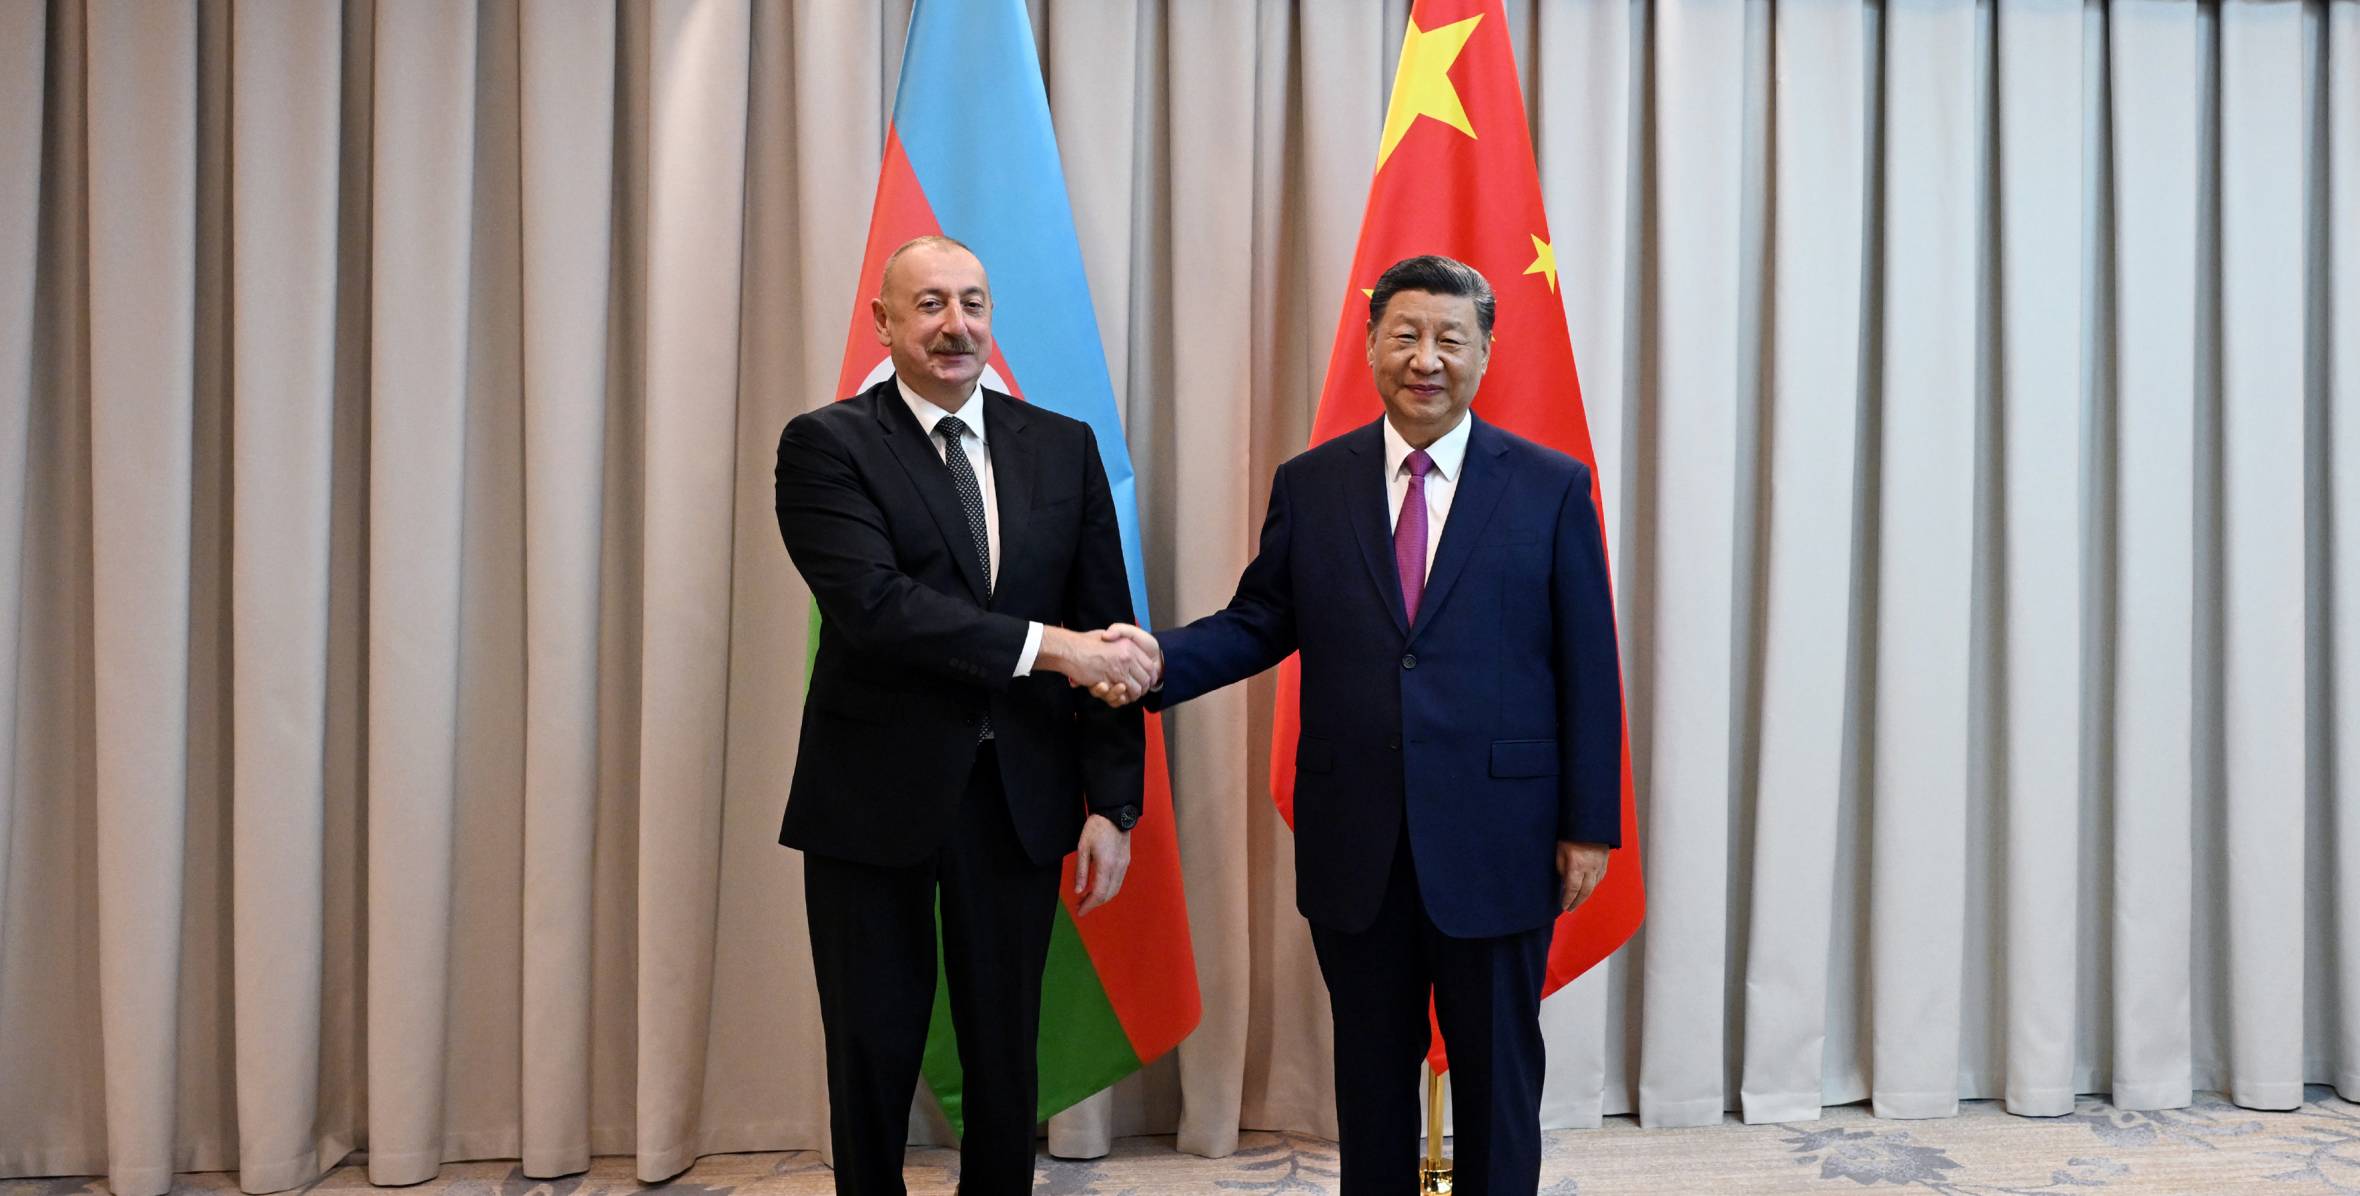 Ilham Aliyev met with President of People's Republic of China Xi Jinping in Astana